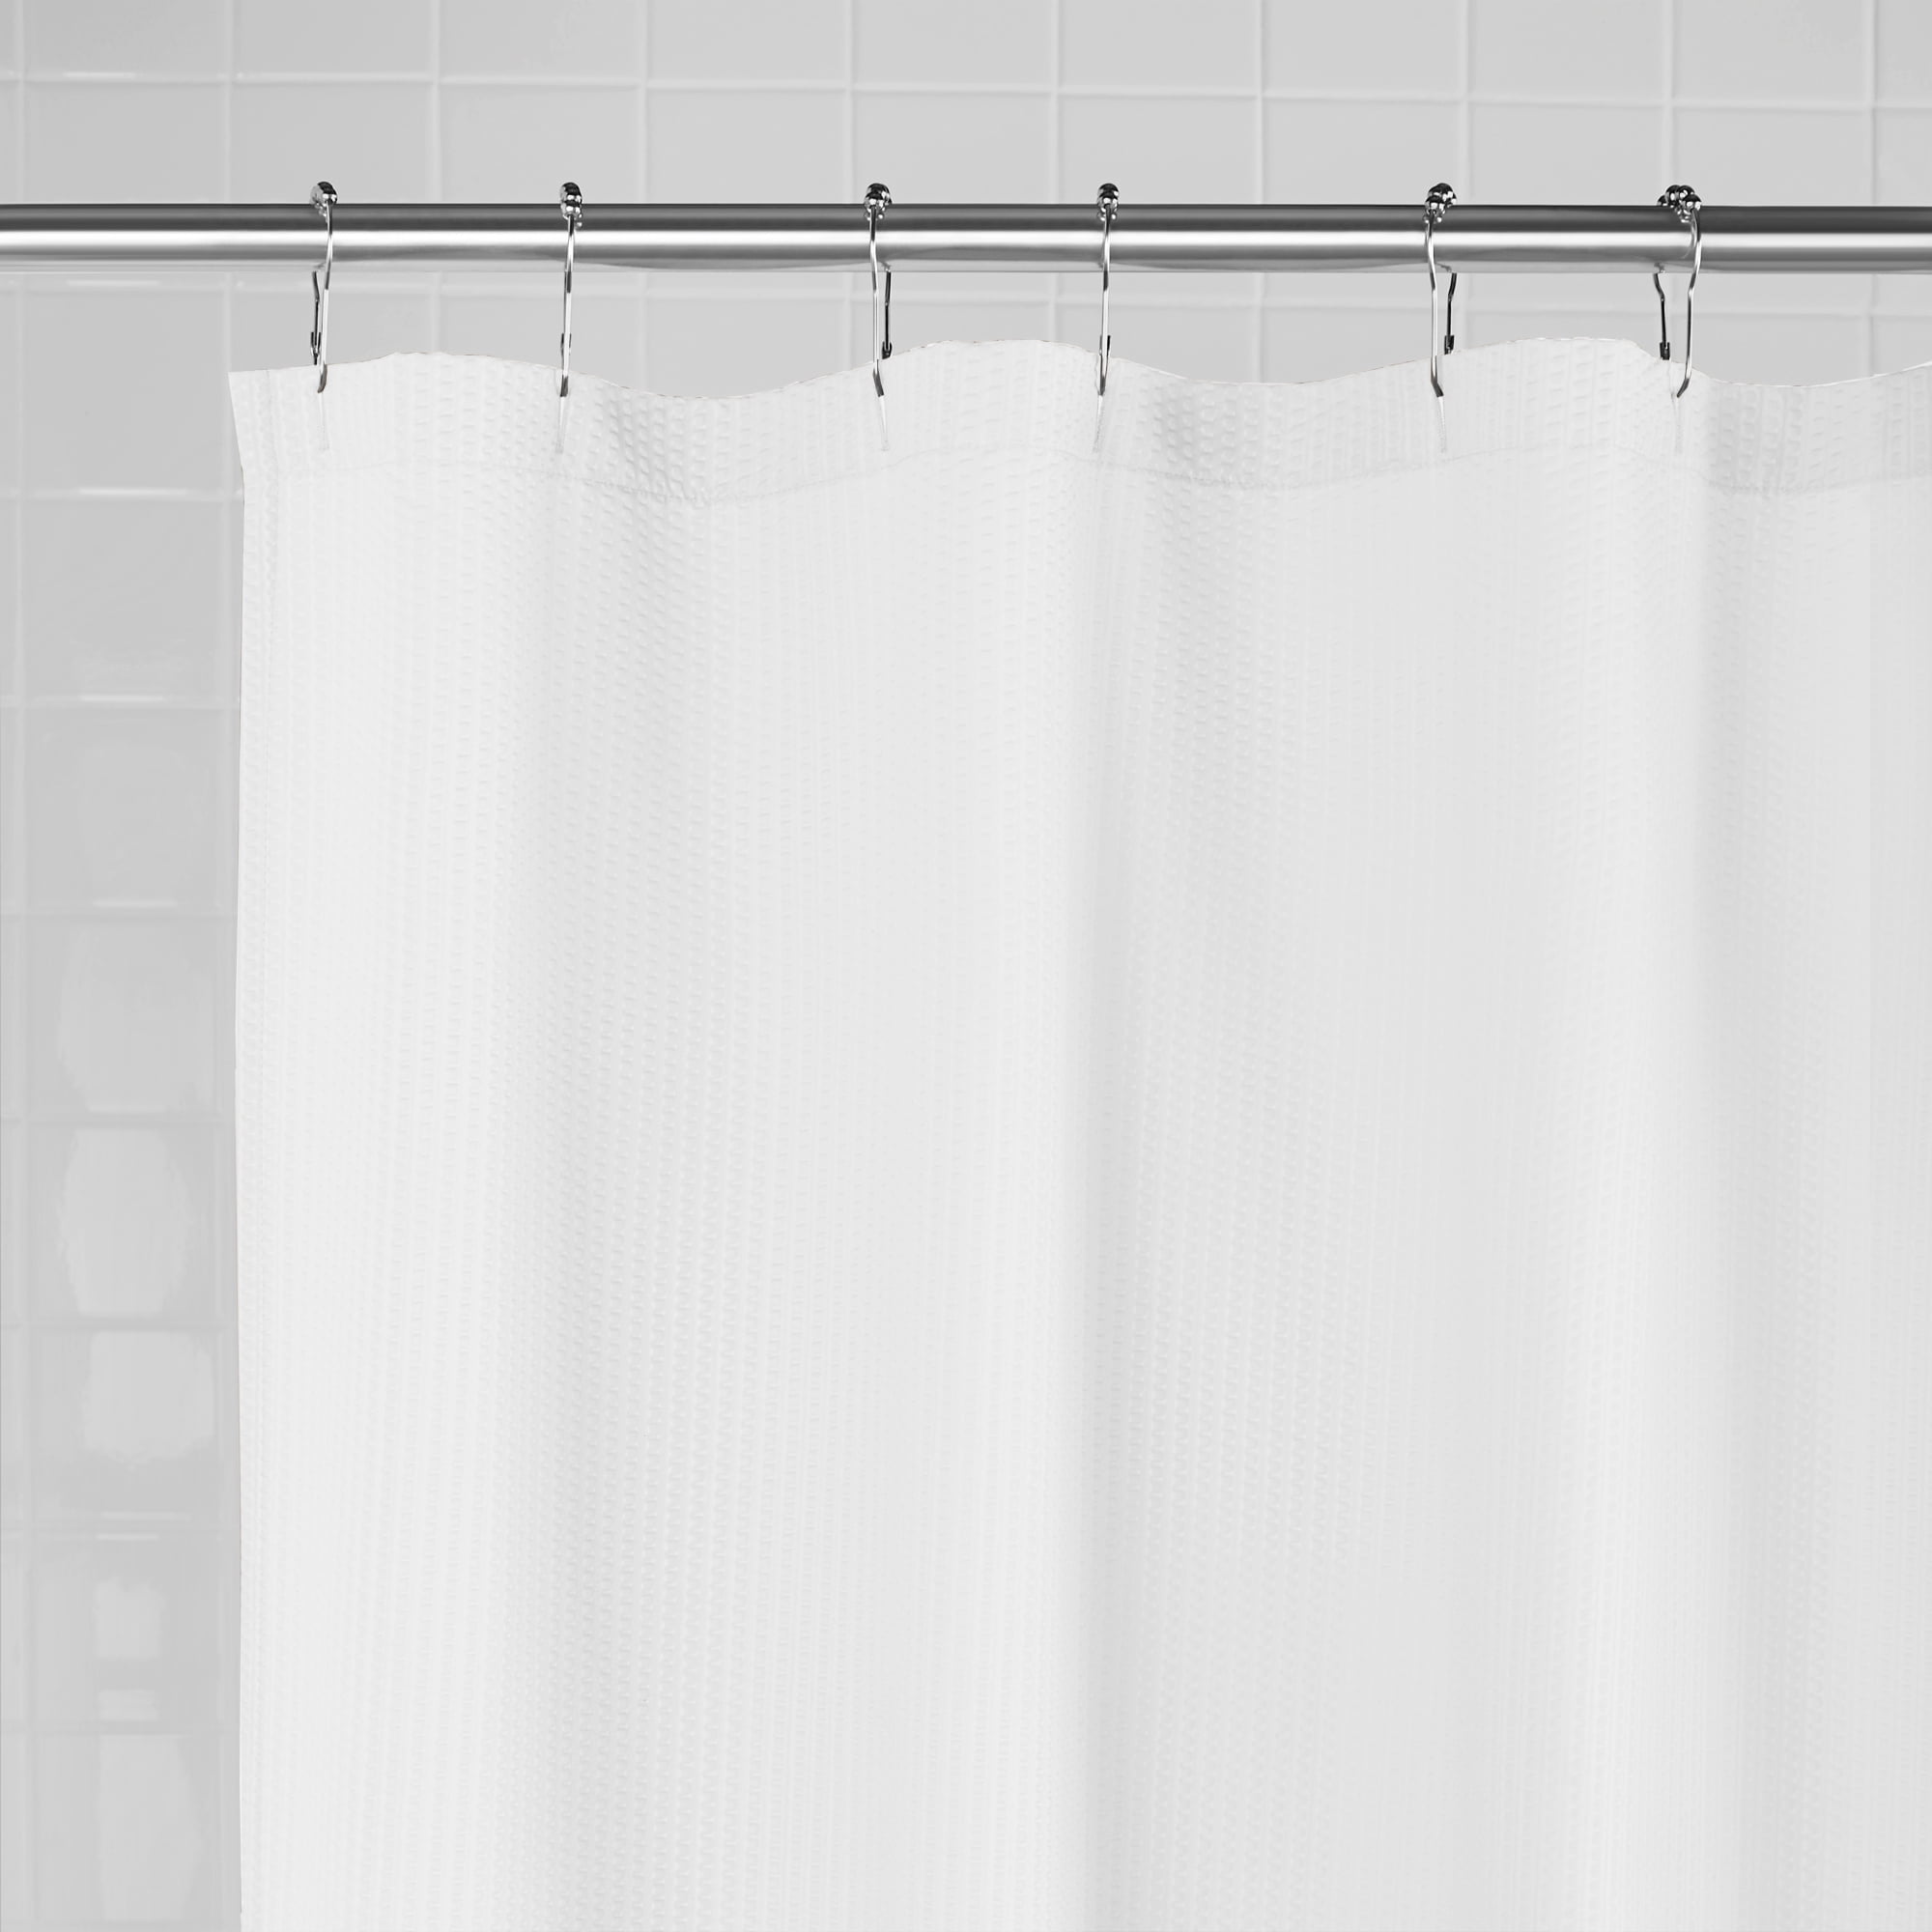 Mainstays Water Repellent Textured, Does A Fabric Shower Curtain Need Liner